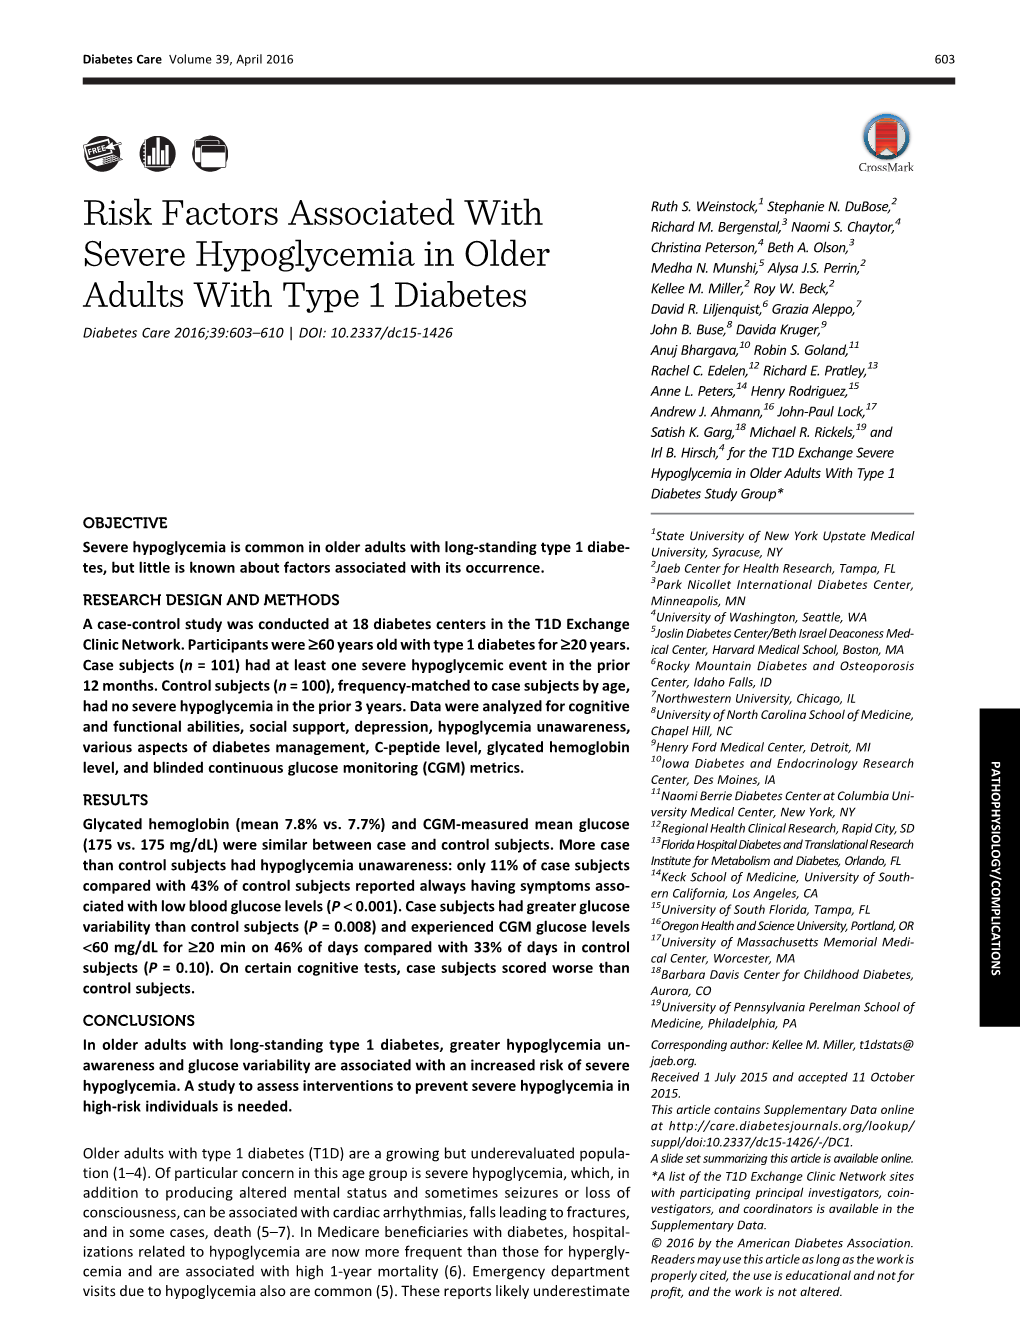 Risk Factors Associated with Severe Hypoglycemia in Older Adults With